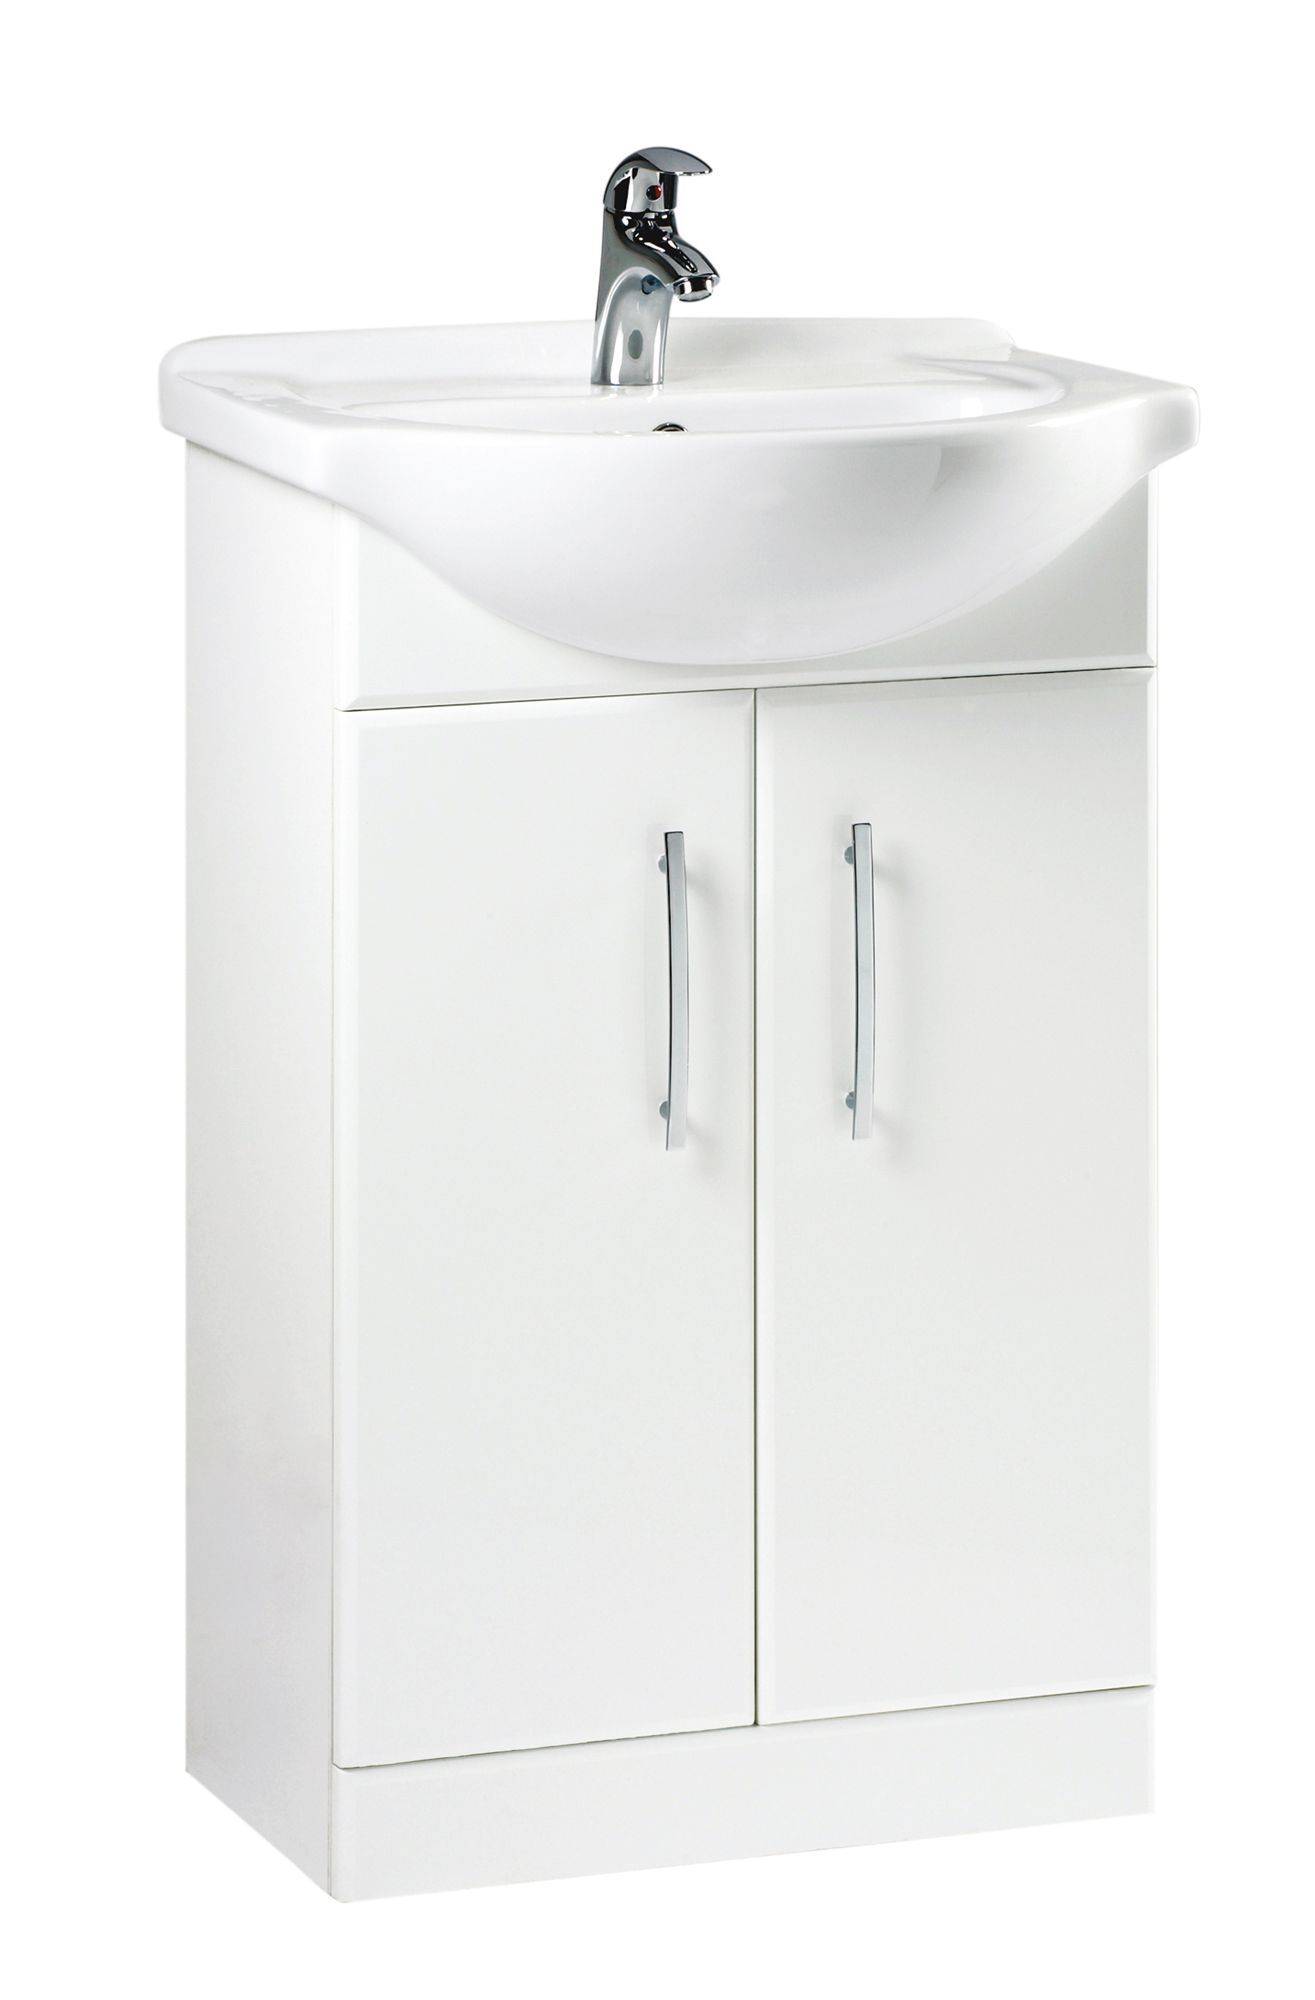 White Vanity Unit Basin Departments Diy At Bq Bathroom intended for size 1315 X 2000